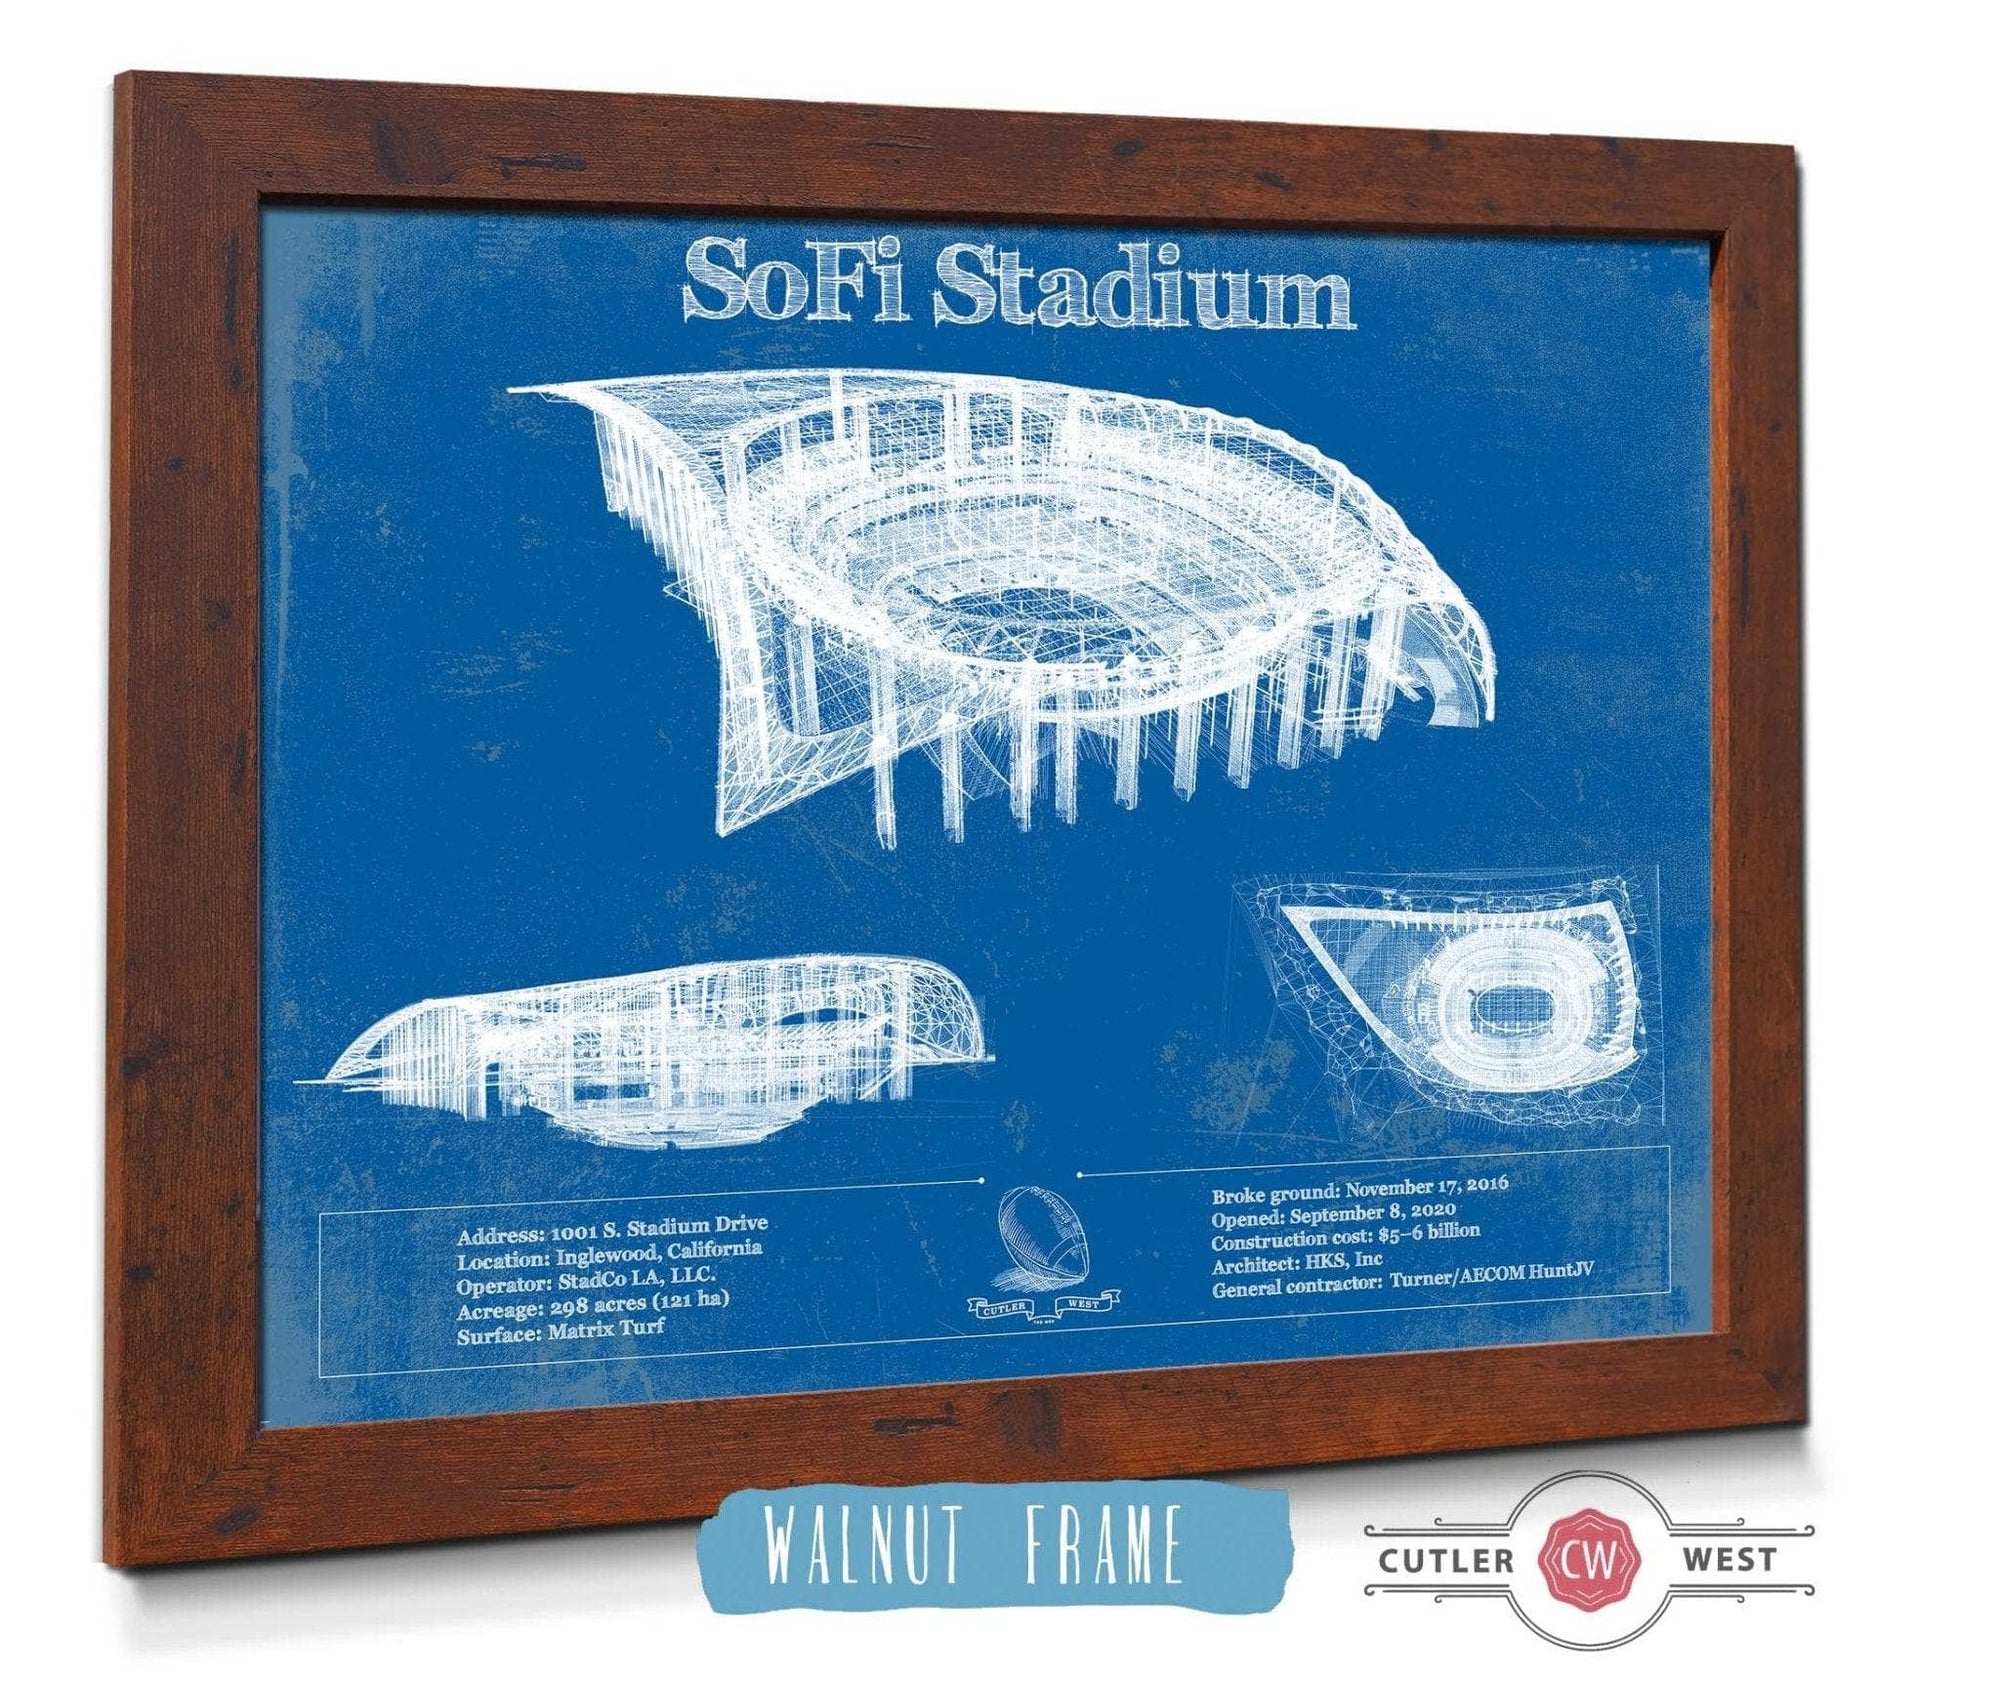 Cutler West Pro Football Collection 14" x 11" / Walnut Frame Los Angeles Chargers - SoFi Stadium Vintage Football Print 933311013_24007